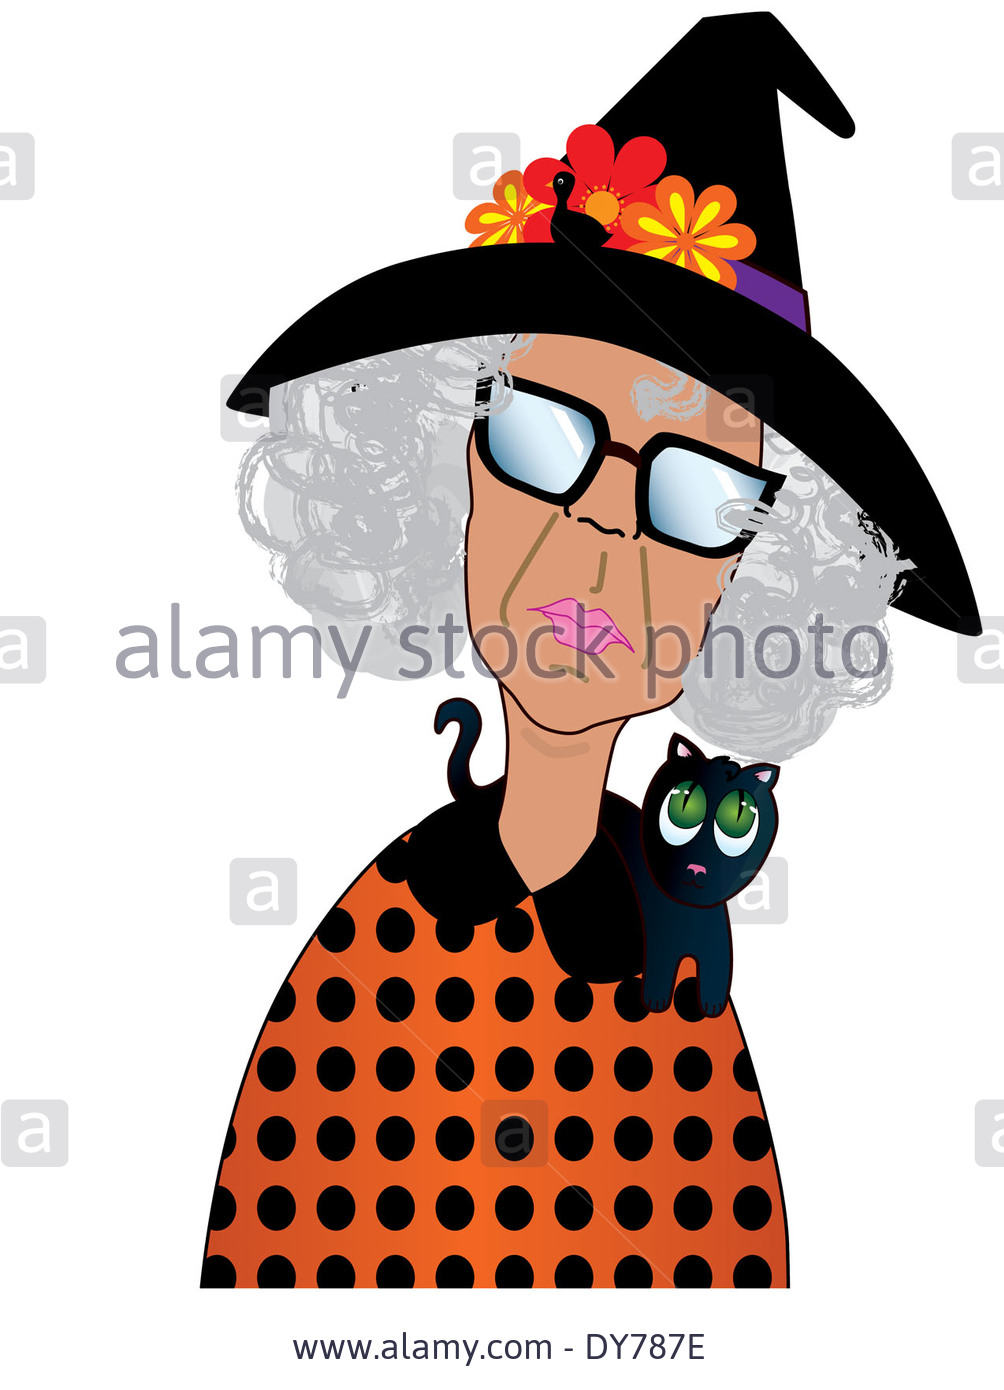 Pin Grumpy Old Woman Stock Photos And Images On Pinterest